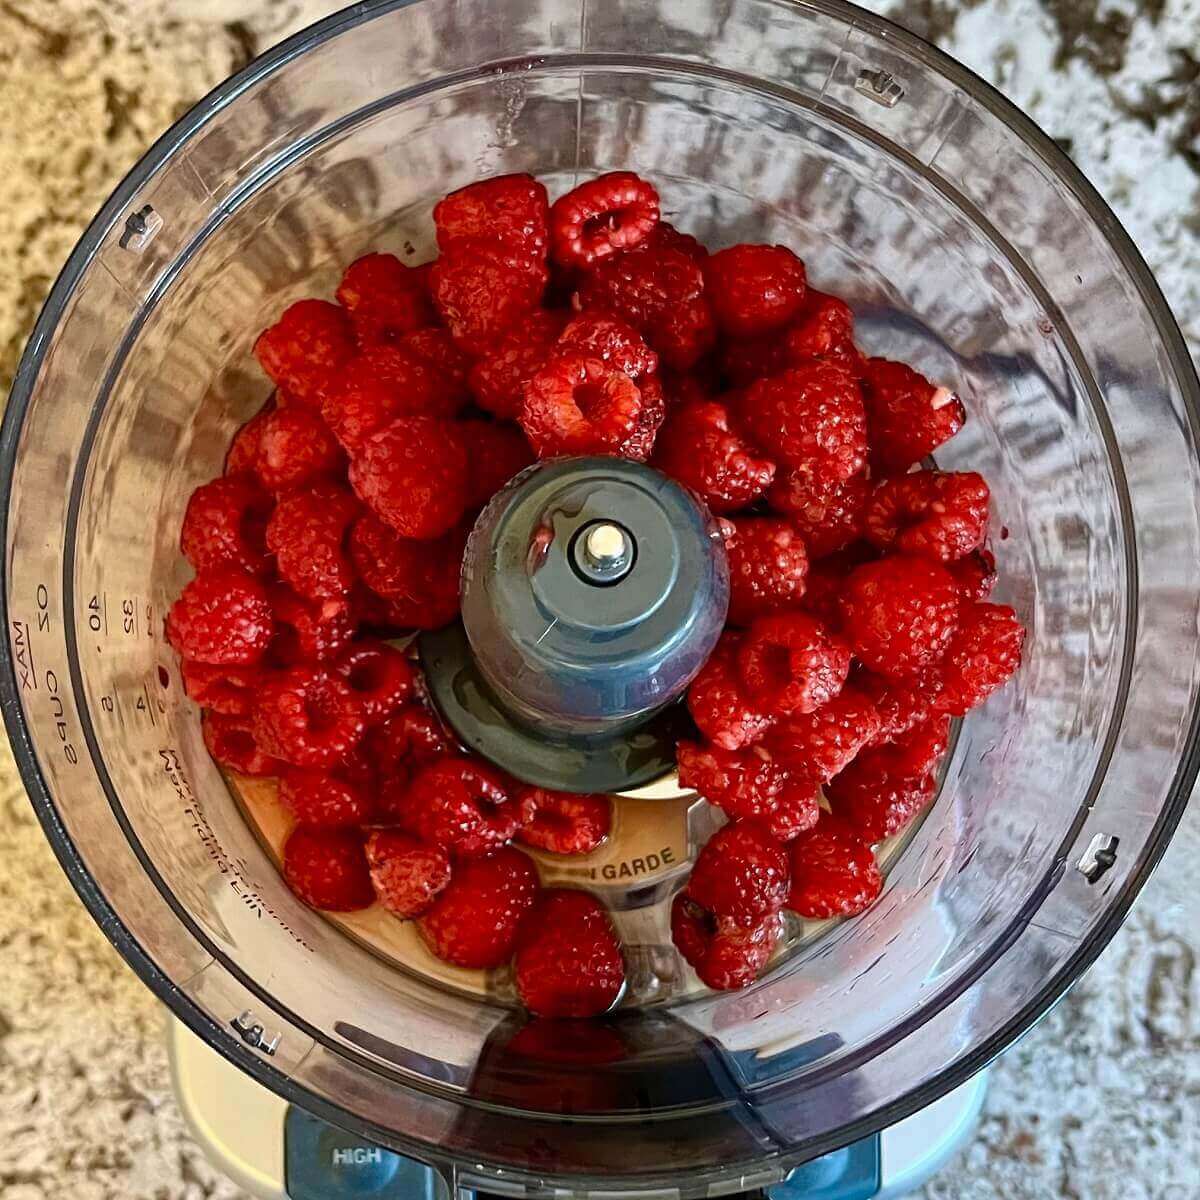 Raspberries and other ingredients for popsicles in a food processor.